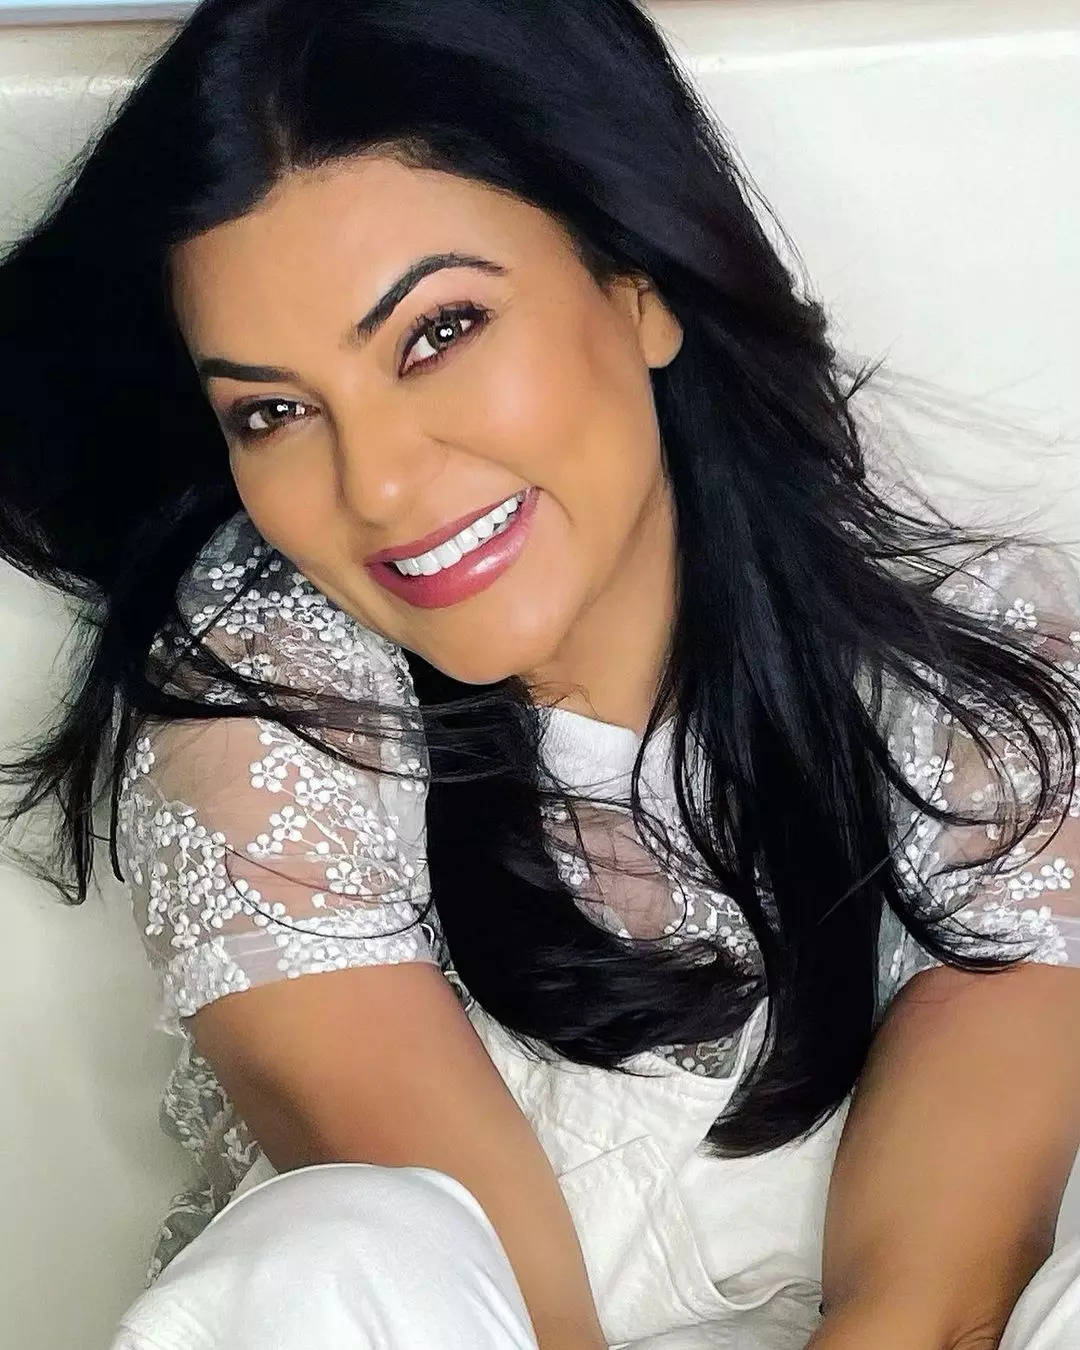 ‘It’s euphoric to win an award for outstanding performance,’ exclaims Sushmita Sen